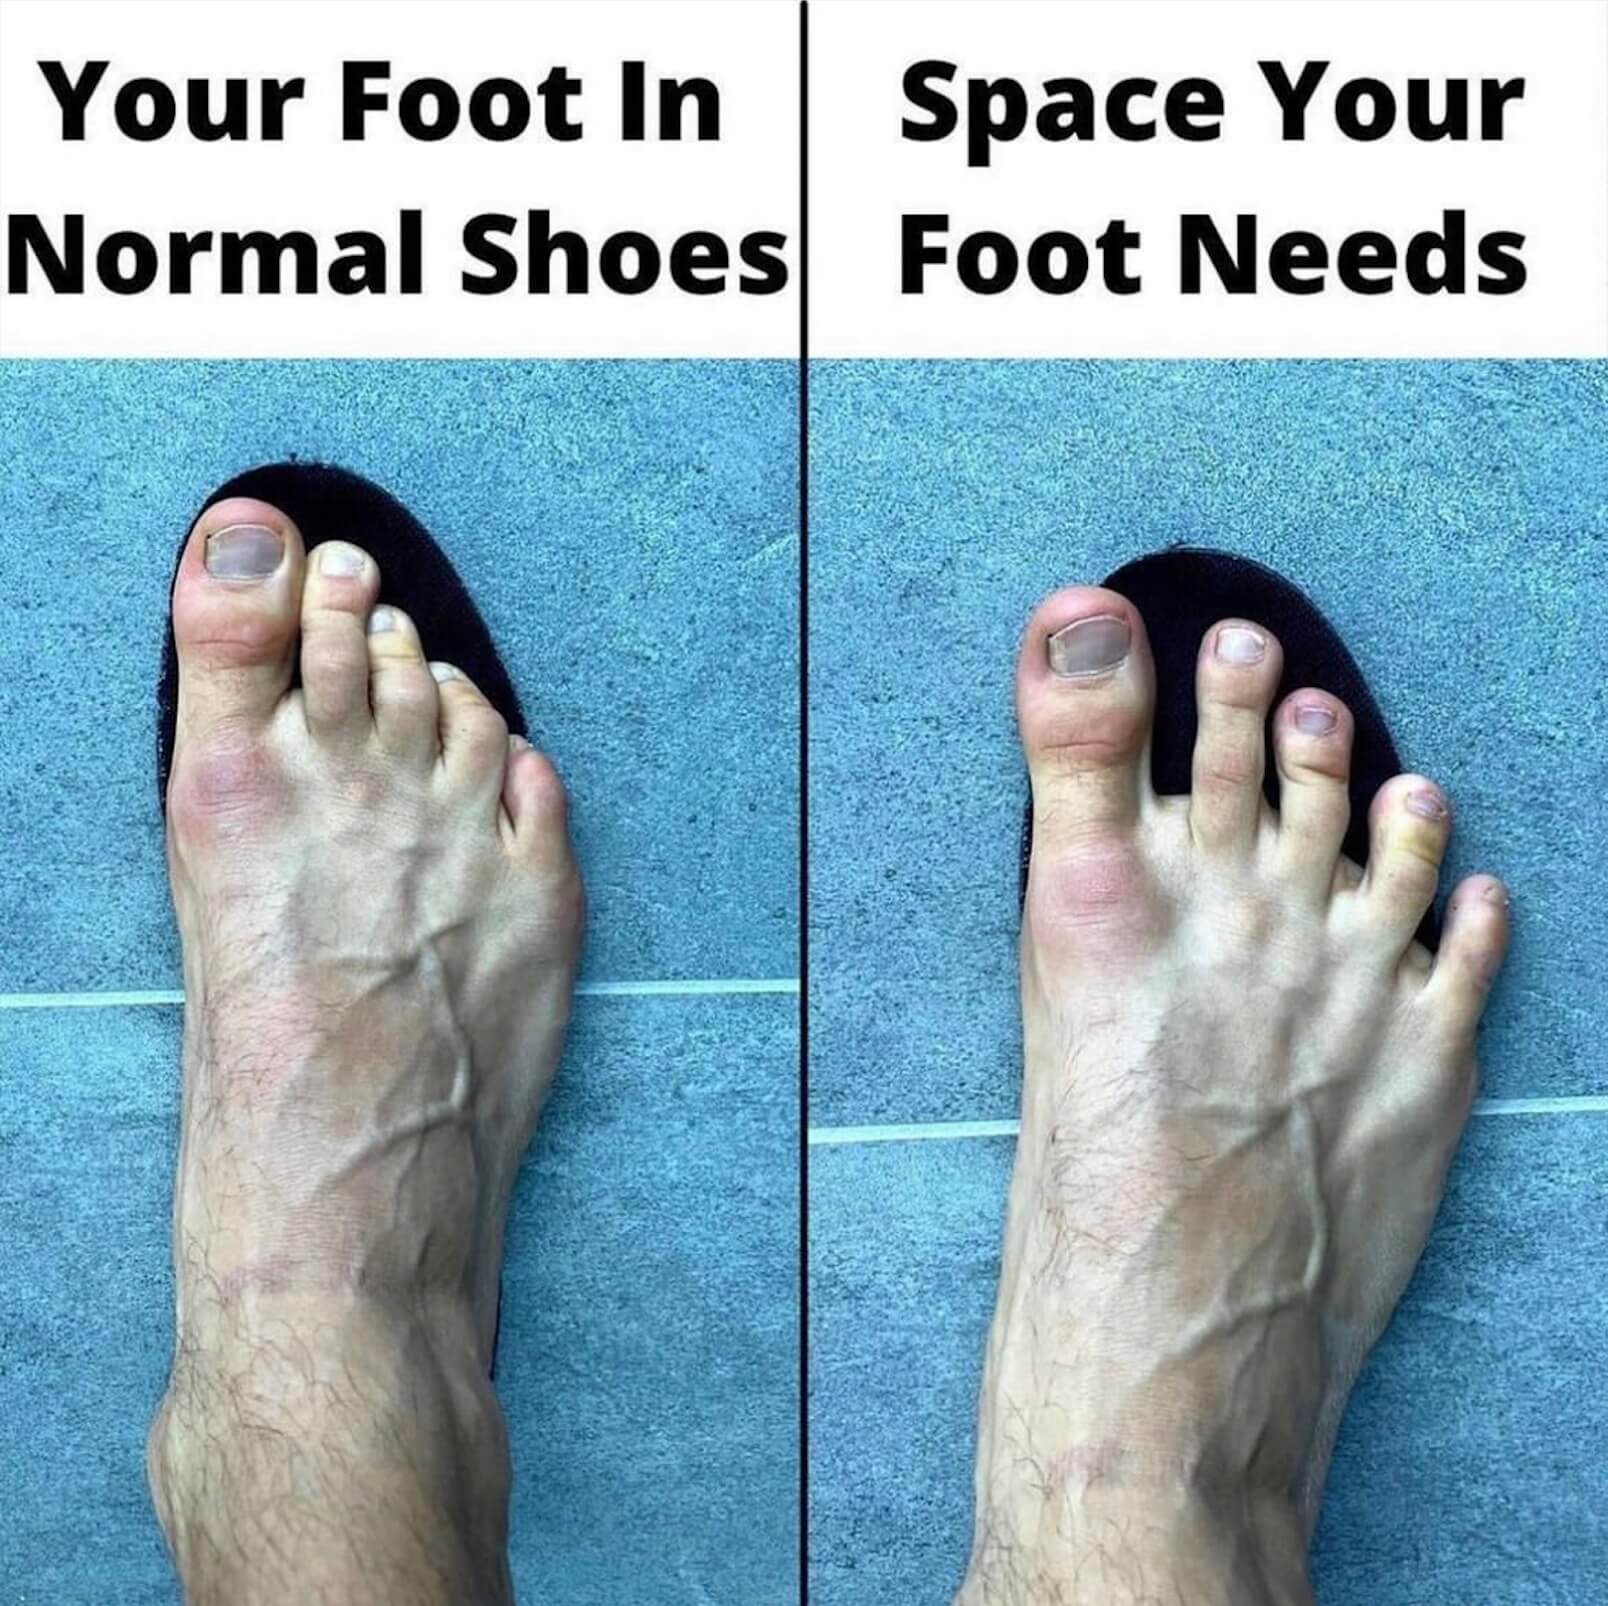 Your foot in normal shoes vs. the space your foot needs.